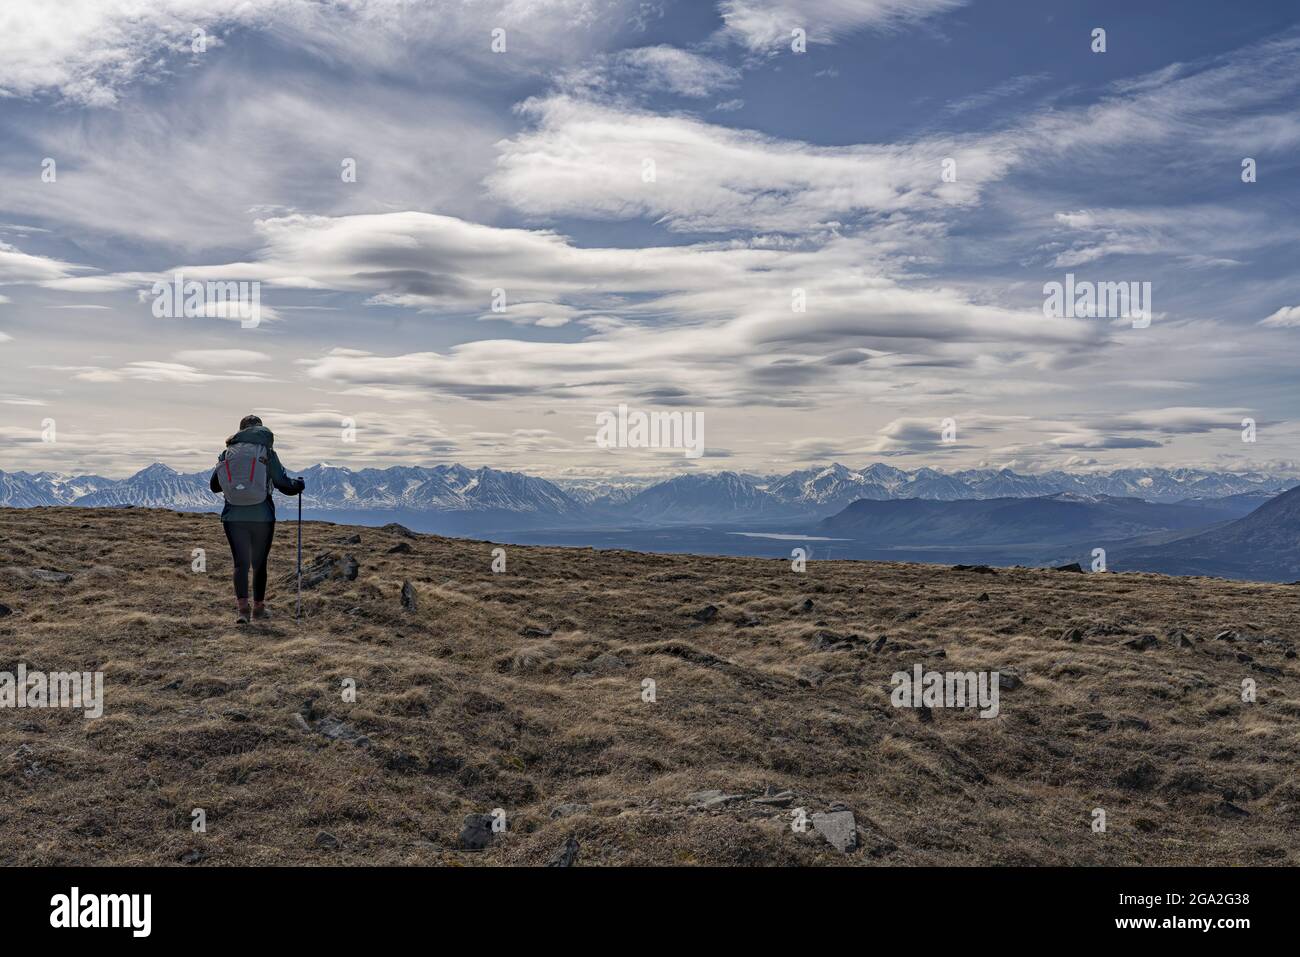 View taken from behind of a woman hiking with trekking poles on the rugged vegetation and rocks of the tundra in front of a silhouetted mountain ra... Stock Photo